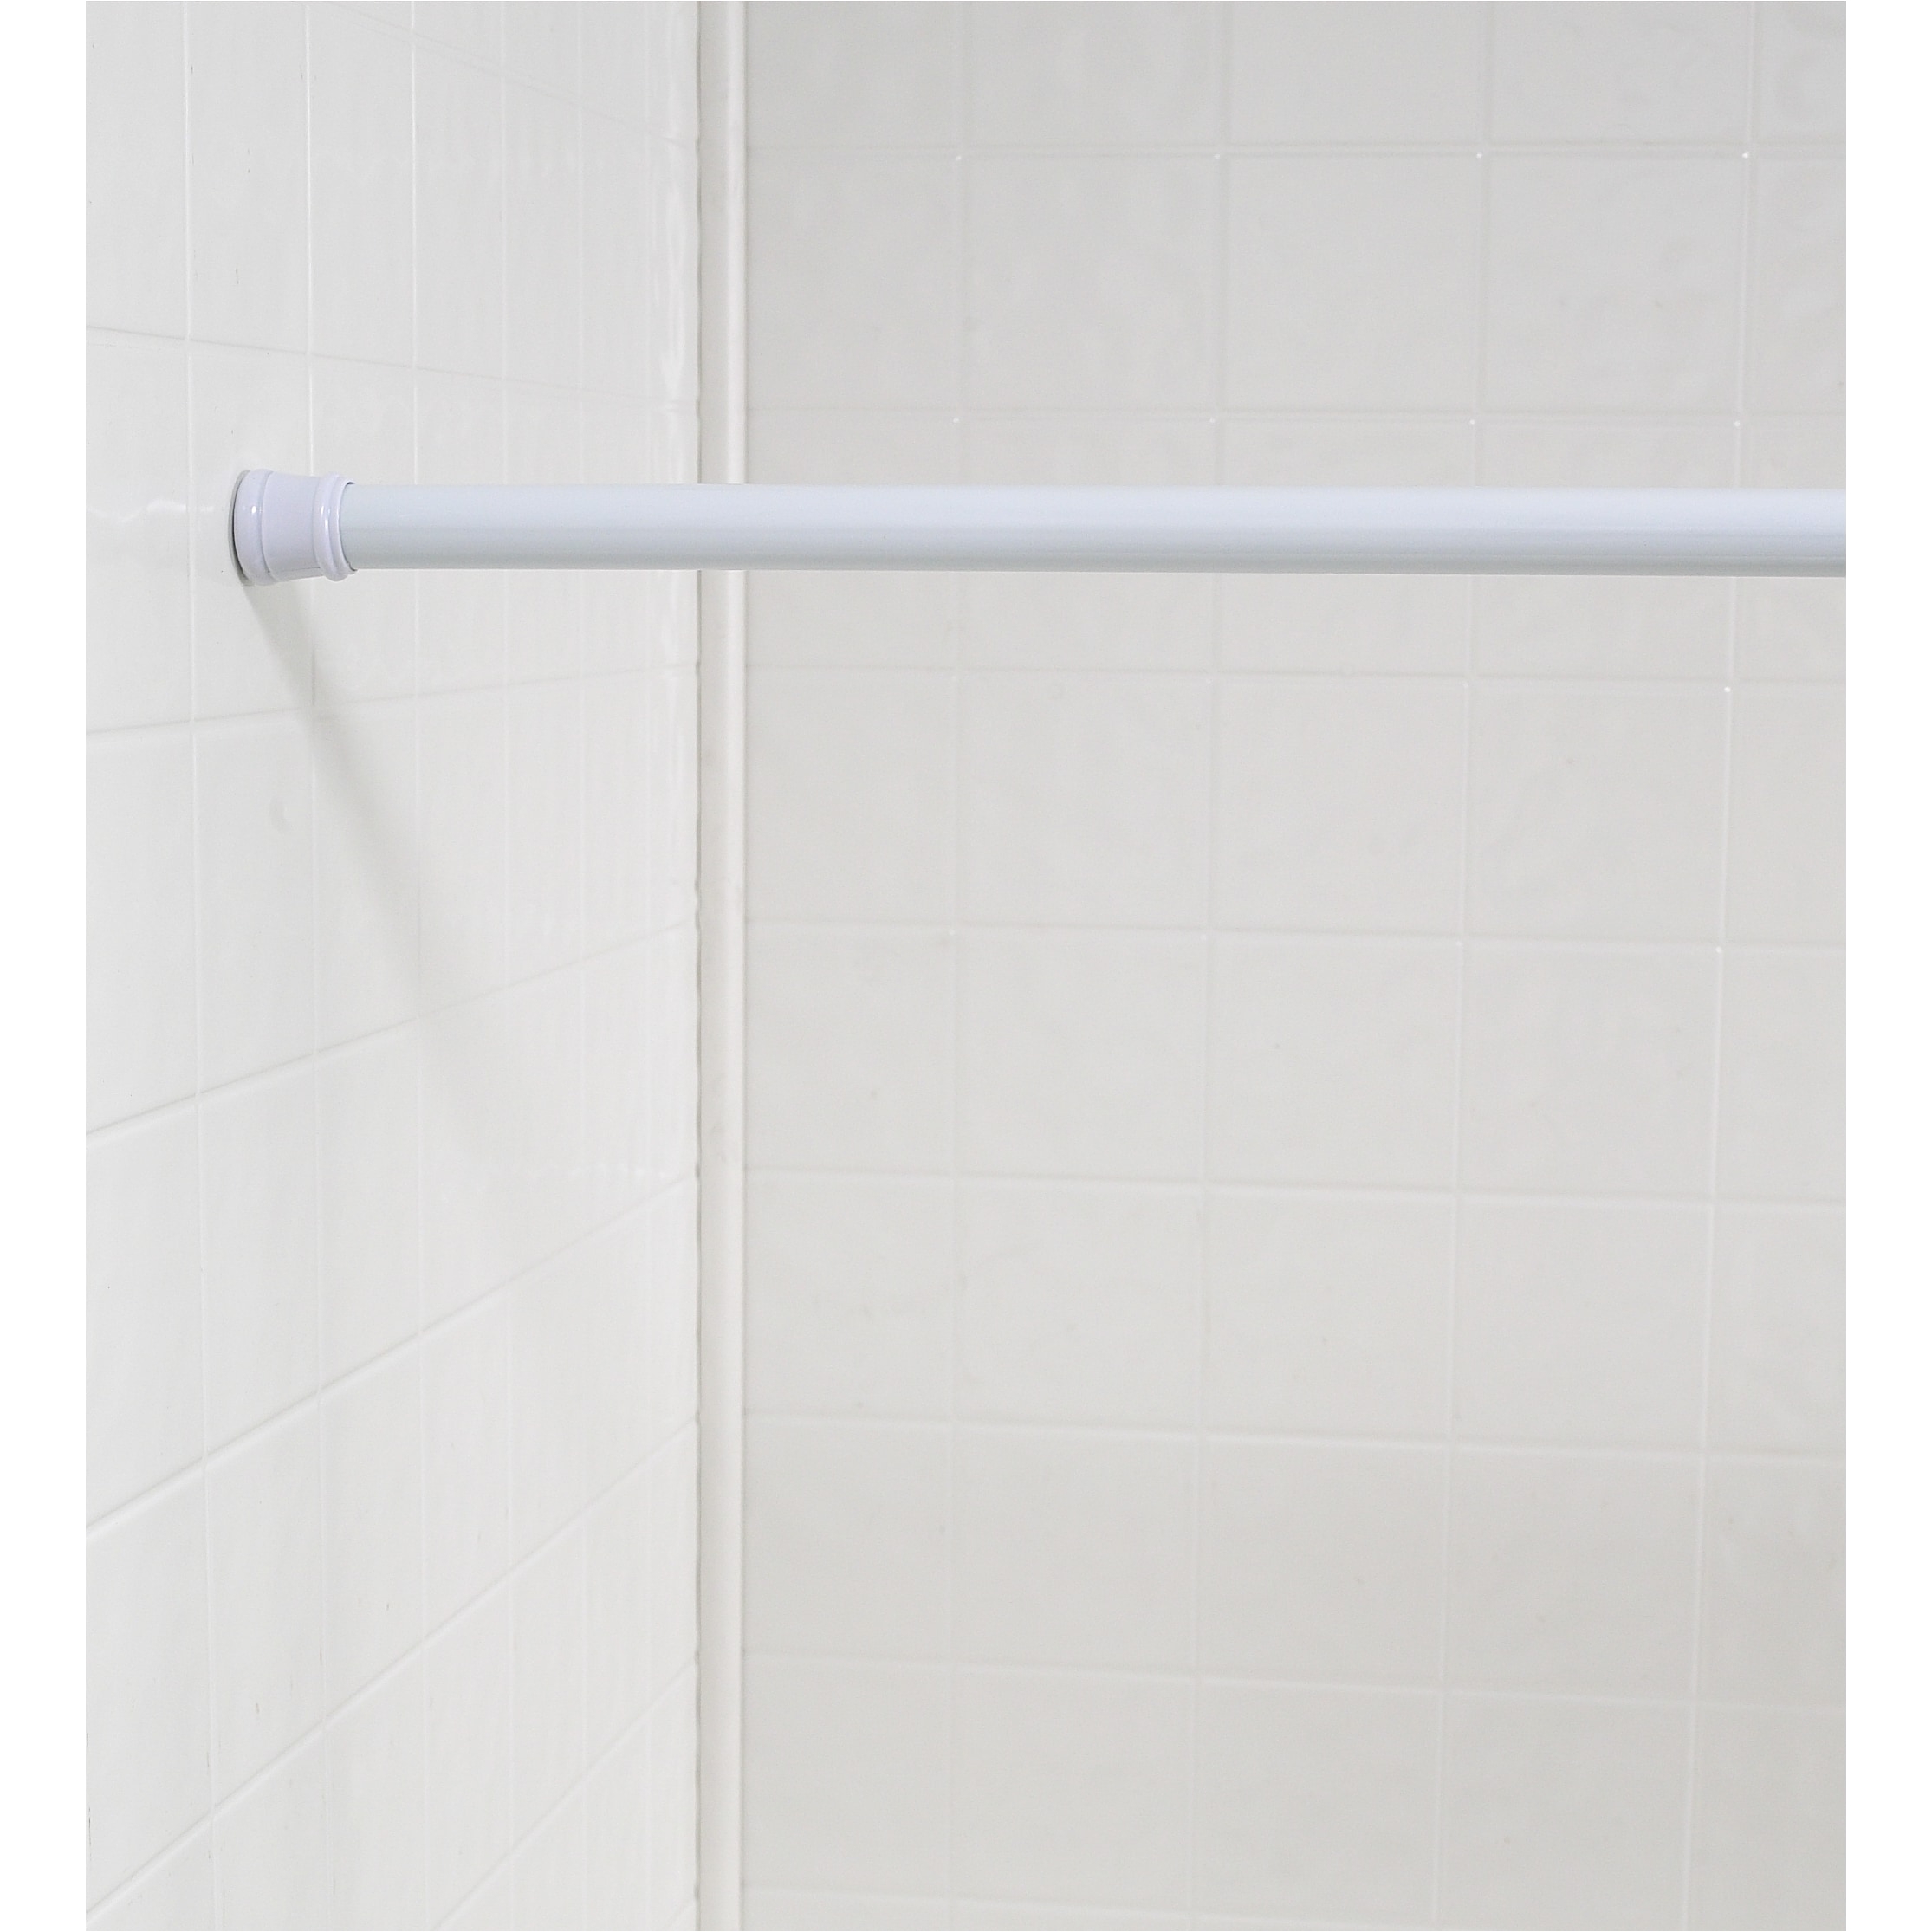 shop standard size shower curtain tension rod free shipping on orders over 45 overstock com 10813692